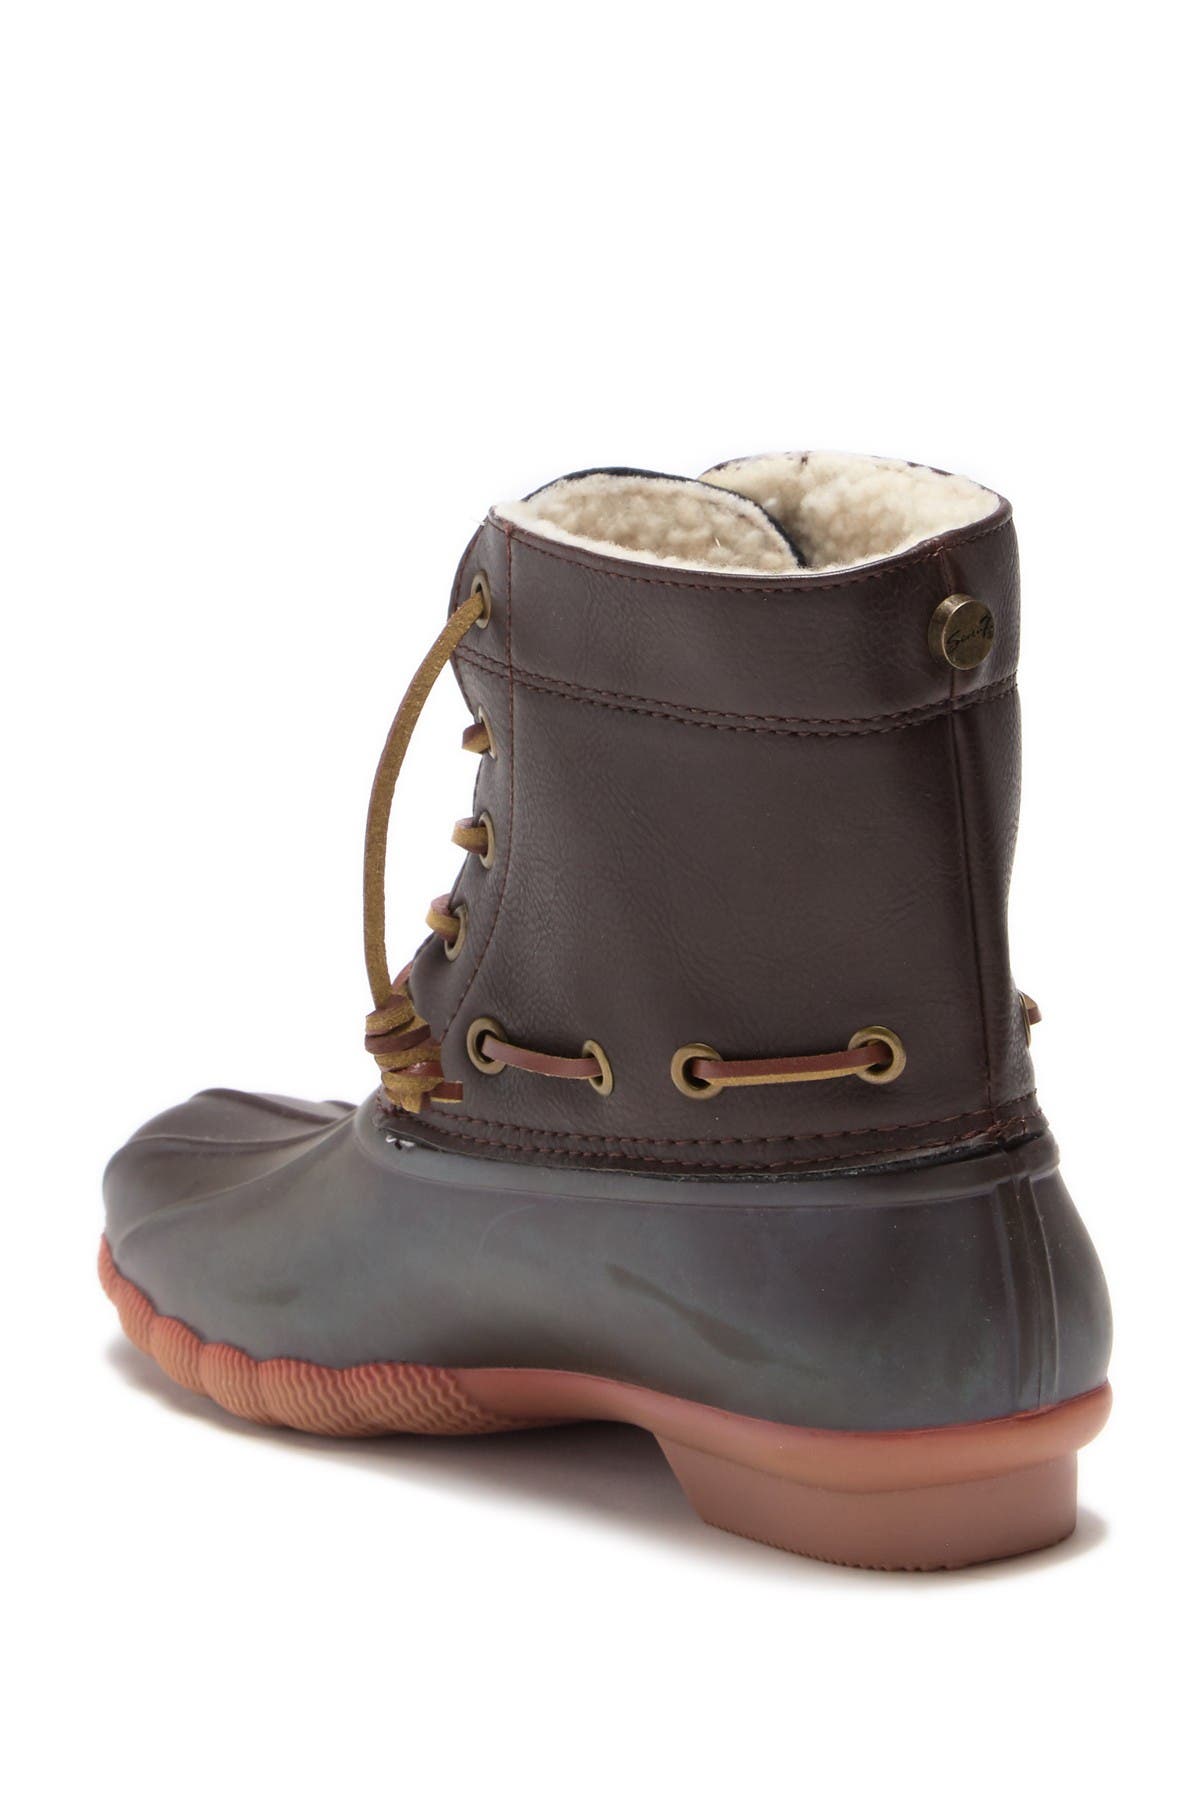 speyside duck boots